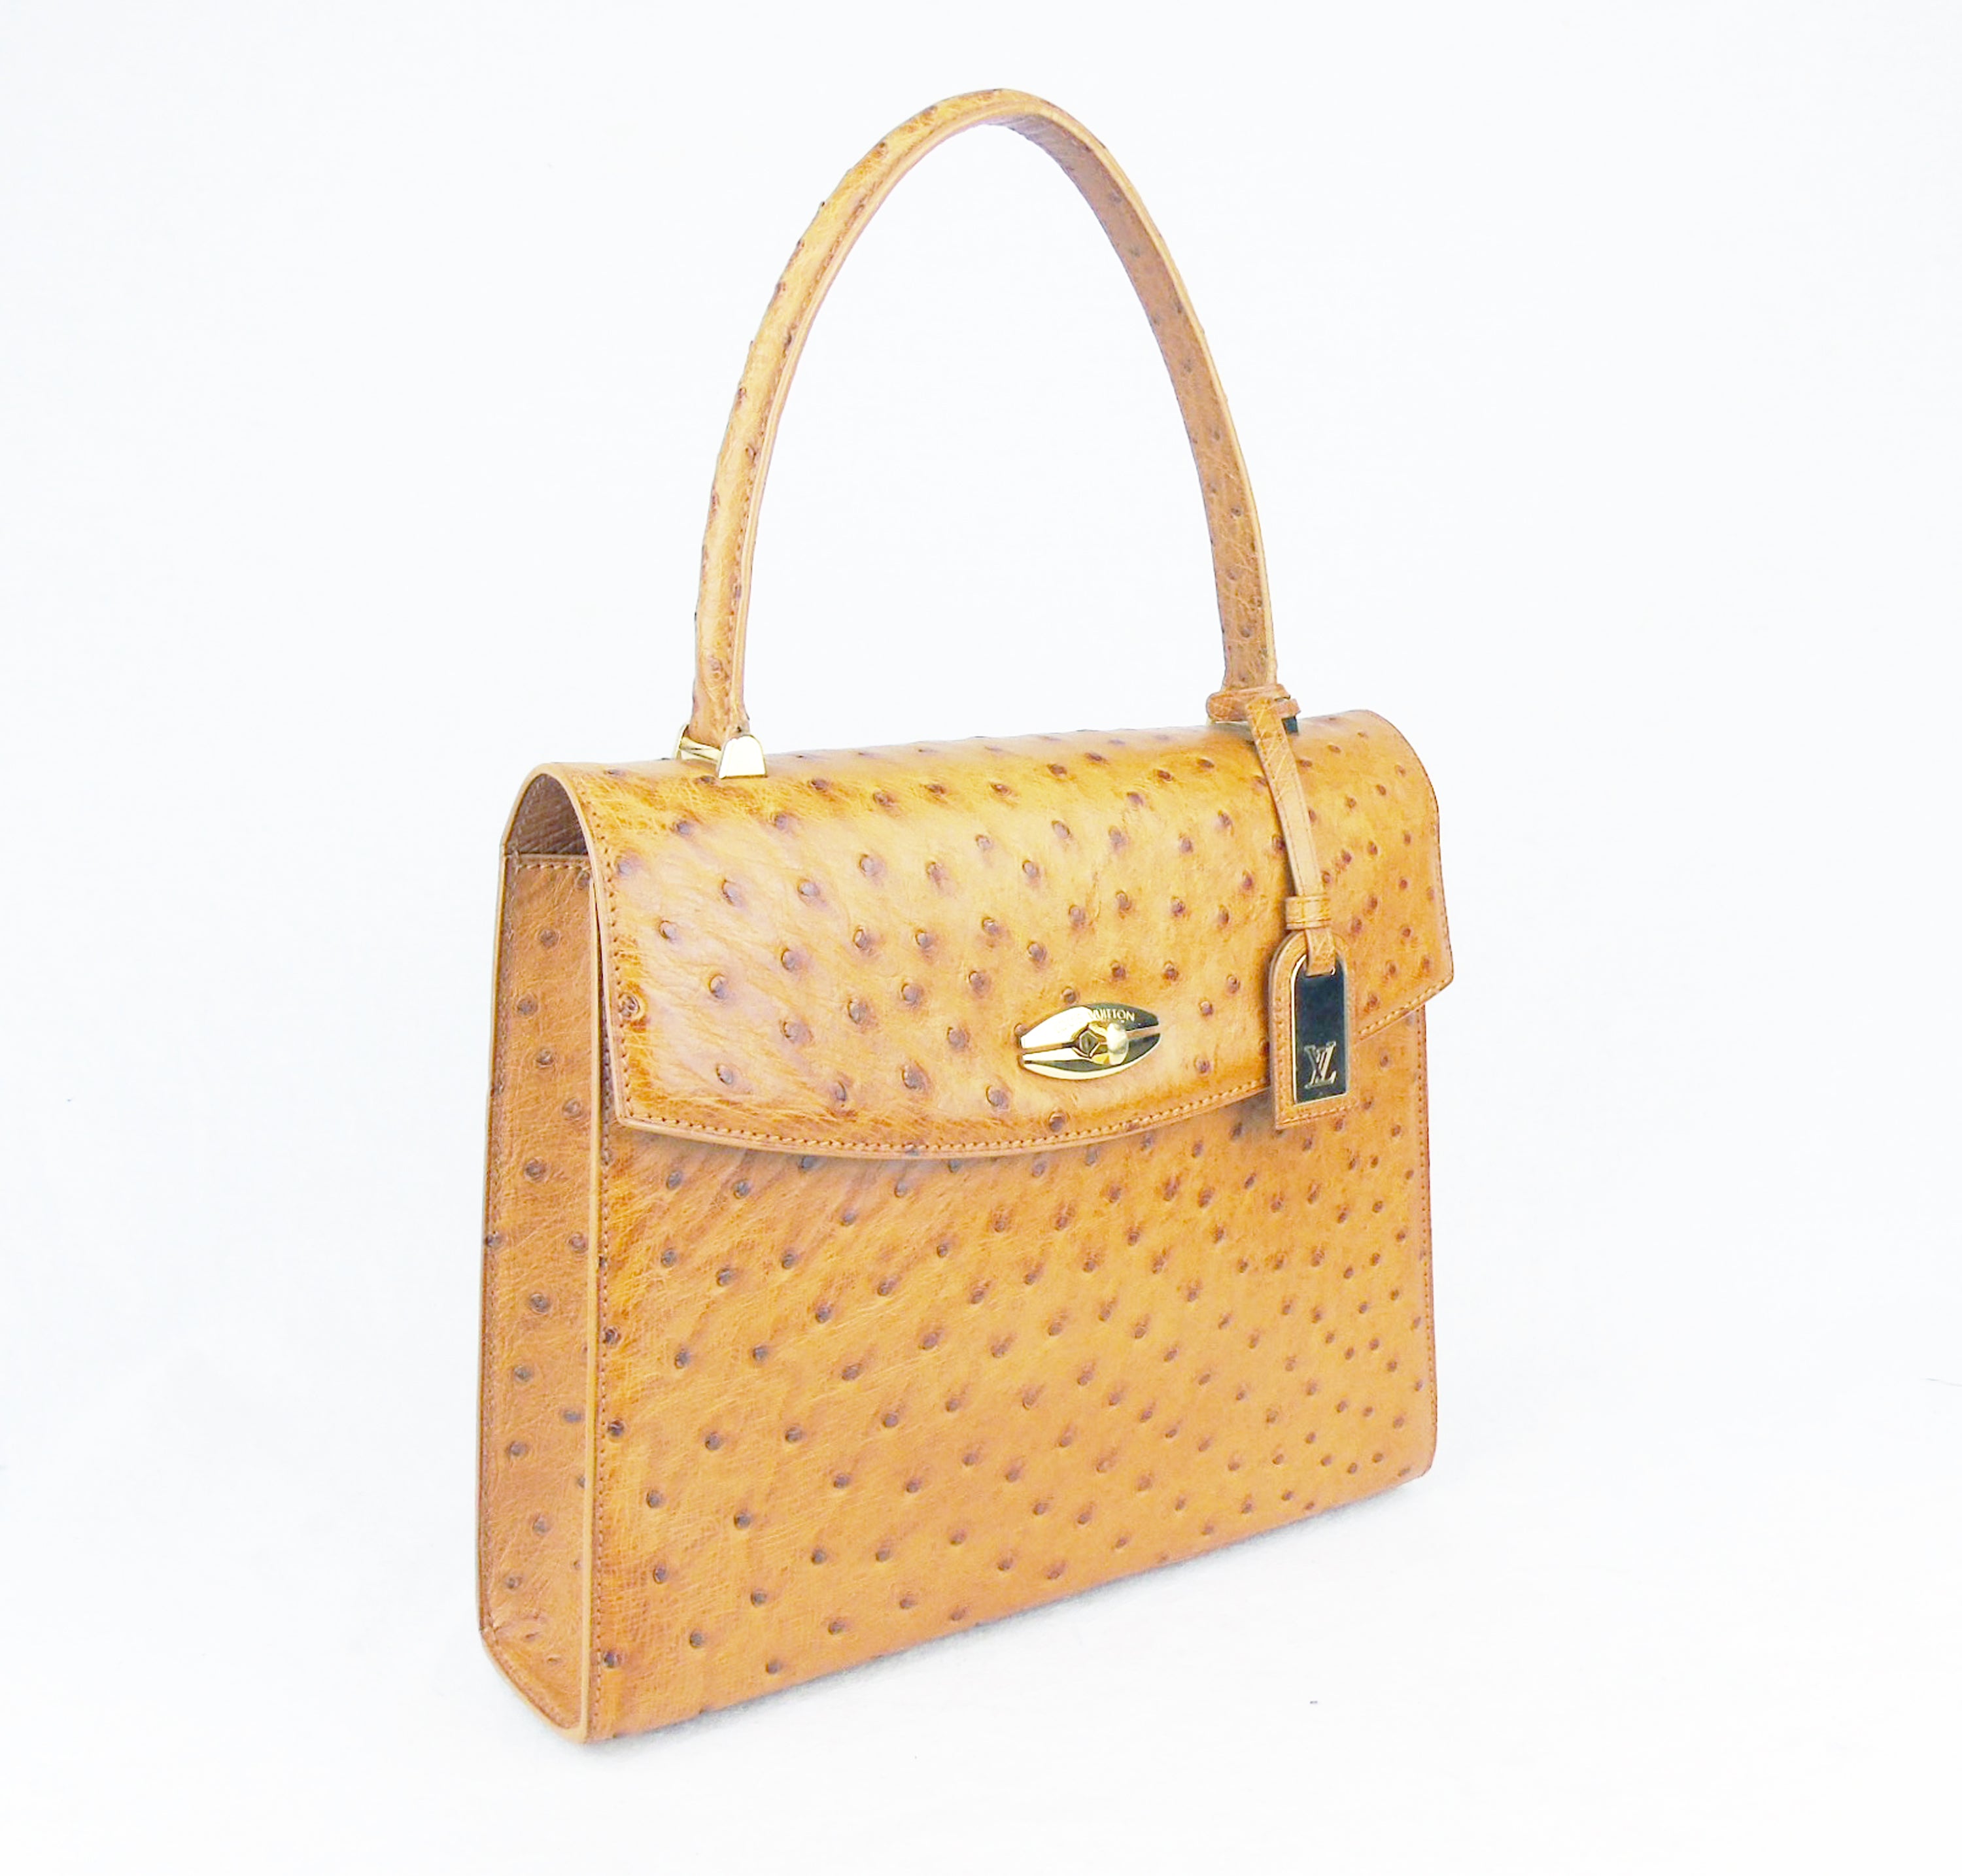 Louis Vuitton 'Malsherbes' Limited Edition Handbag in Tan Ostrich Leather